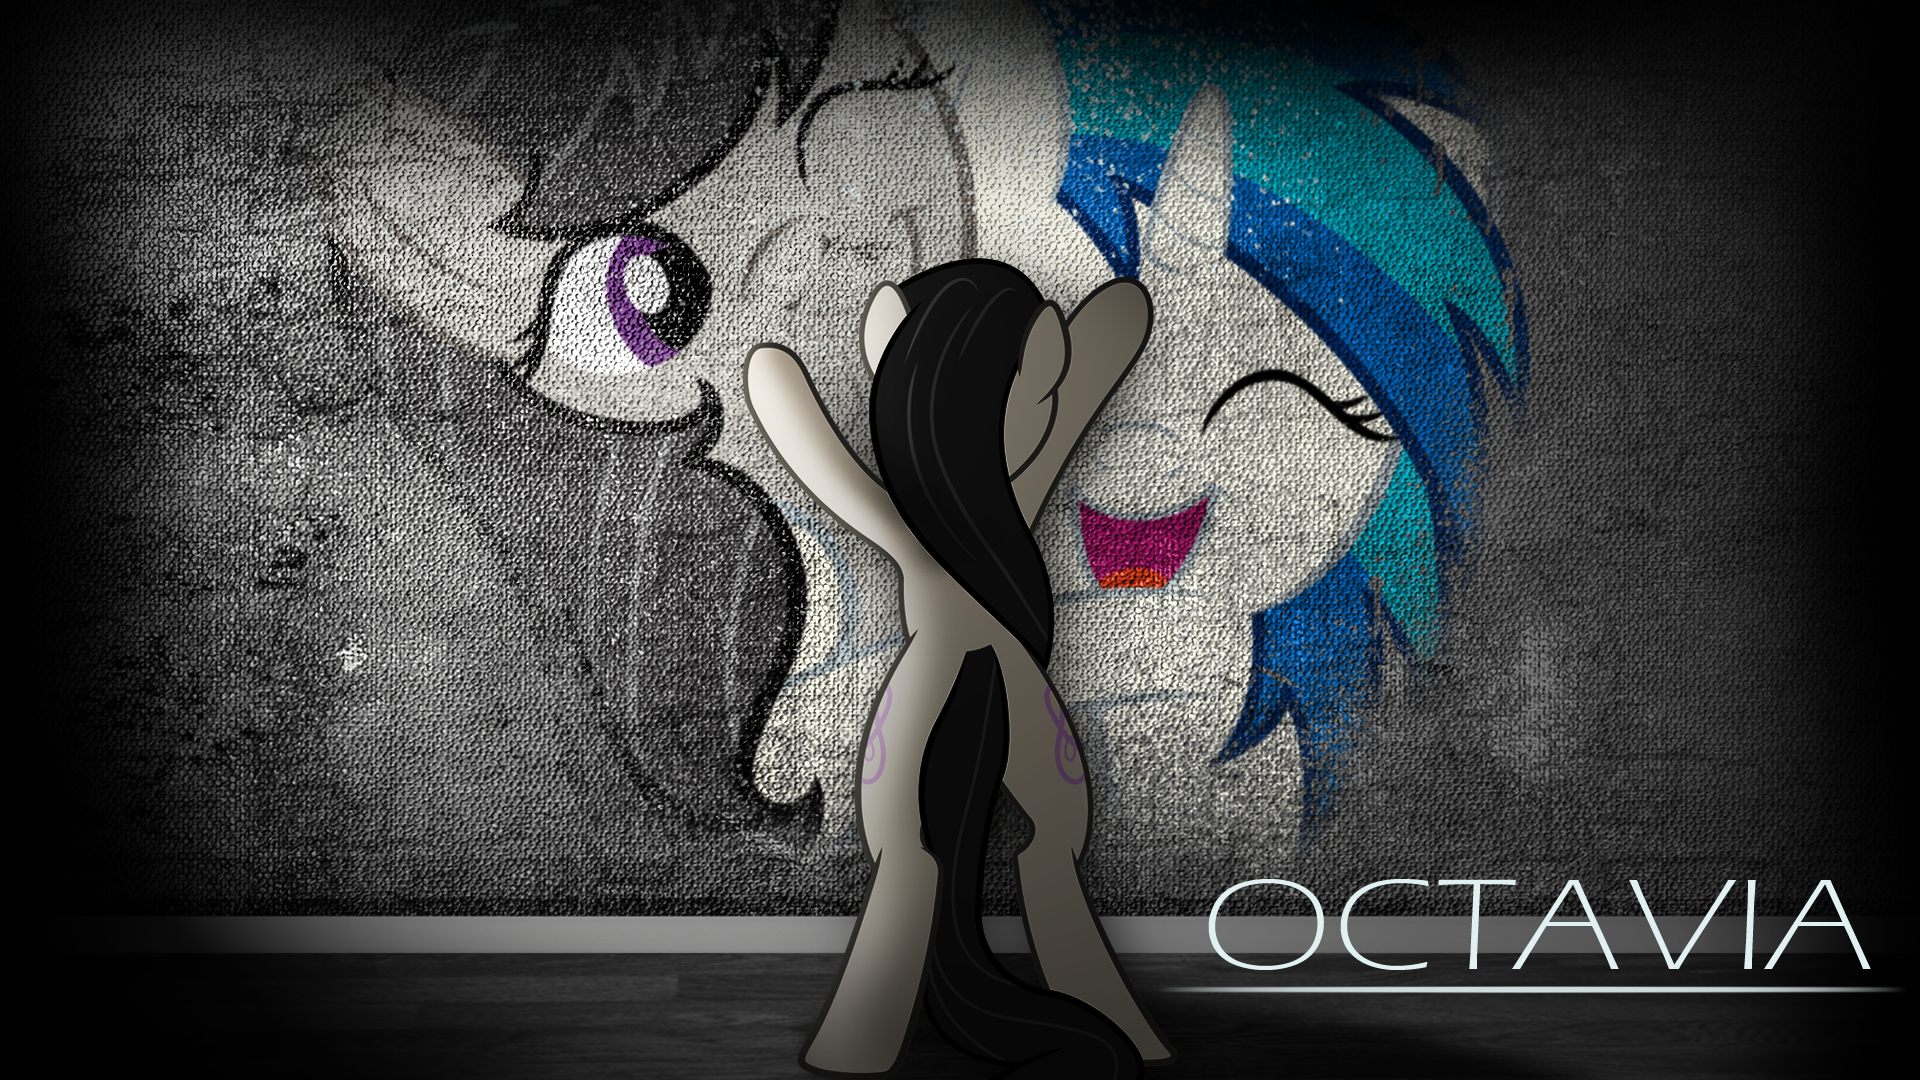 Octavia alone Wallpaper by ASTROtheH, datNaro and Quanno3